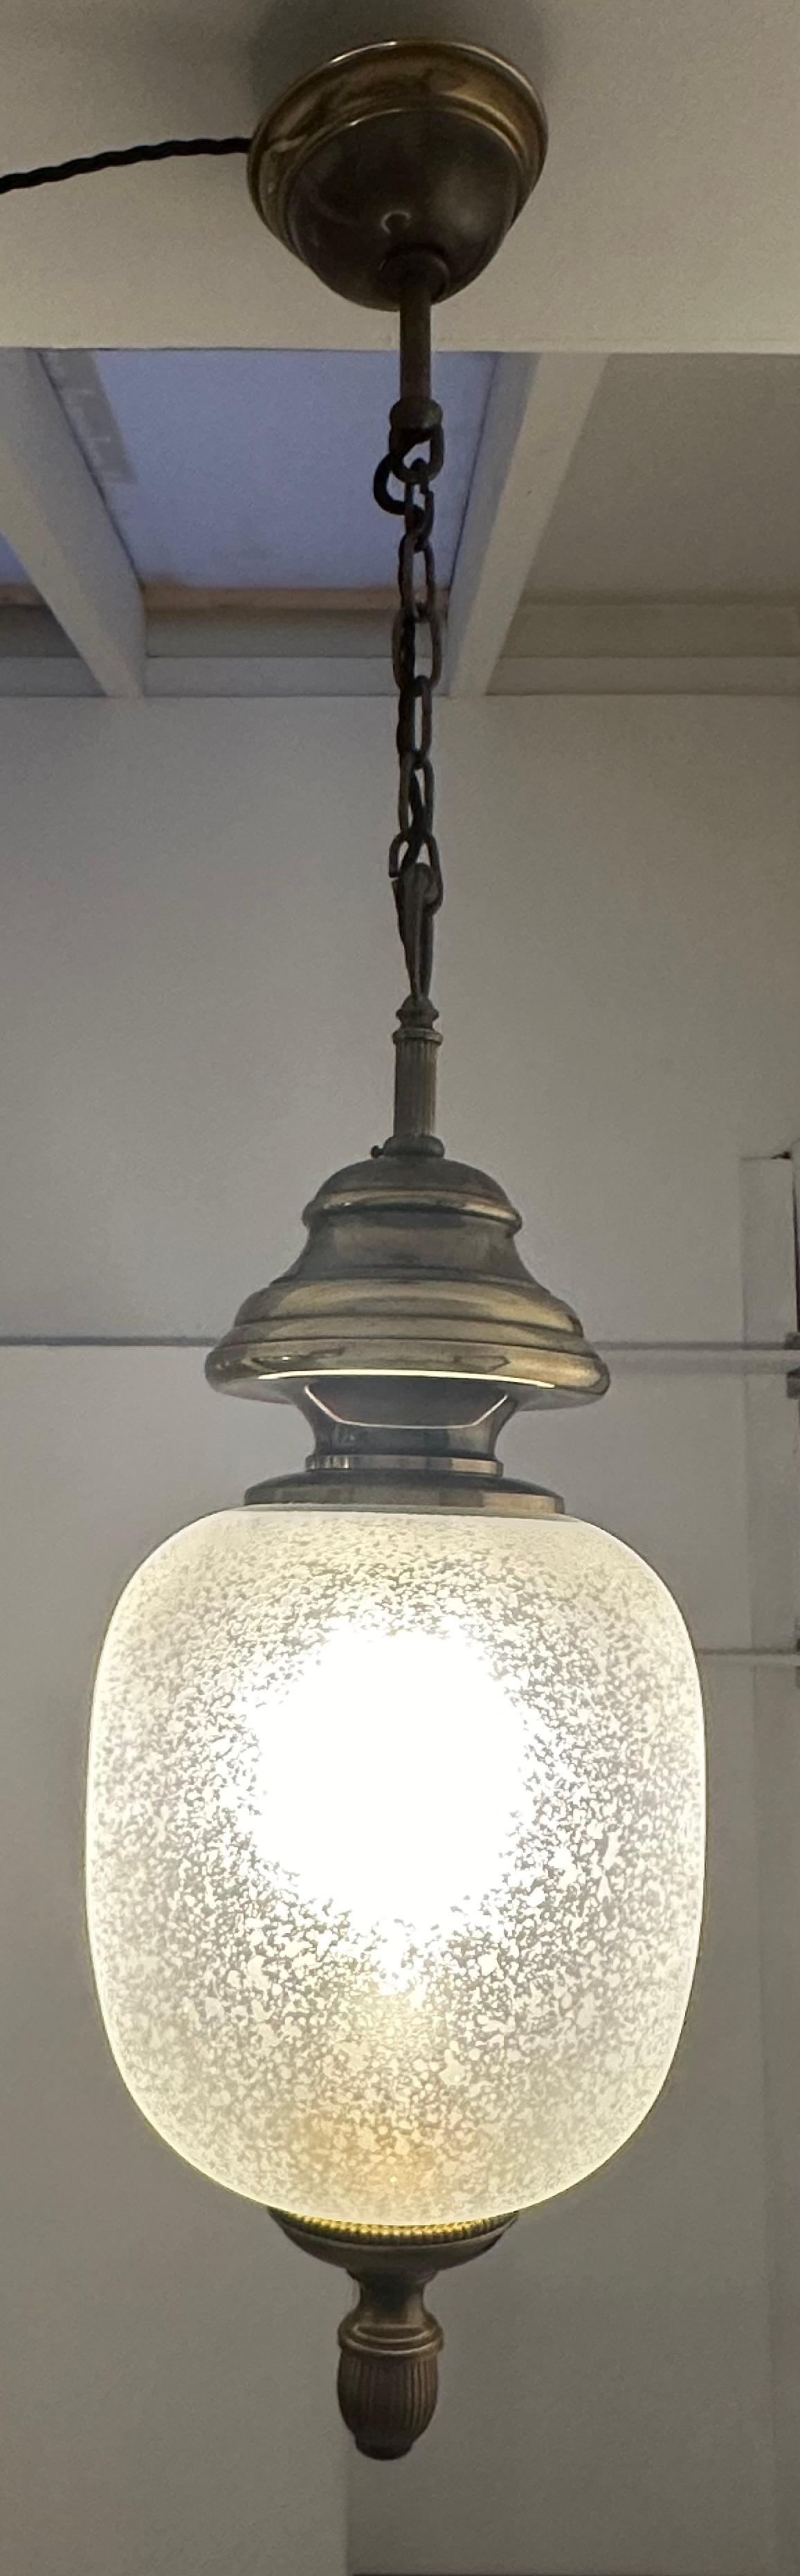 1960s Italian Murano glass and brass pendant lantern hanging ceiling light.  Designed by Gaetano Sciolari for Sciolari Lighting.  The Murano handblown glass oval shade has a beautiful engraved mottled patterned surface with amoeba shaped frosted